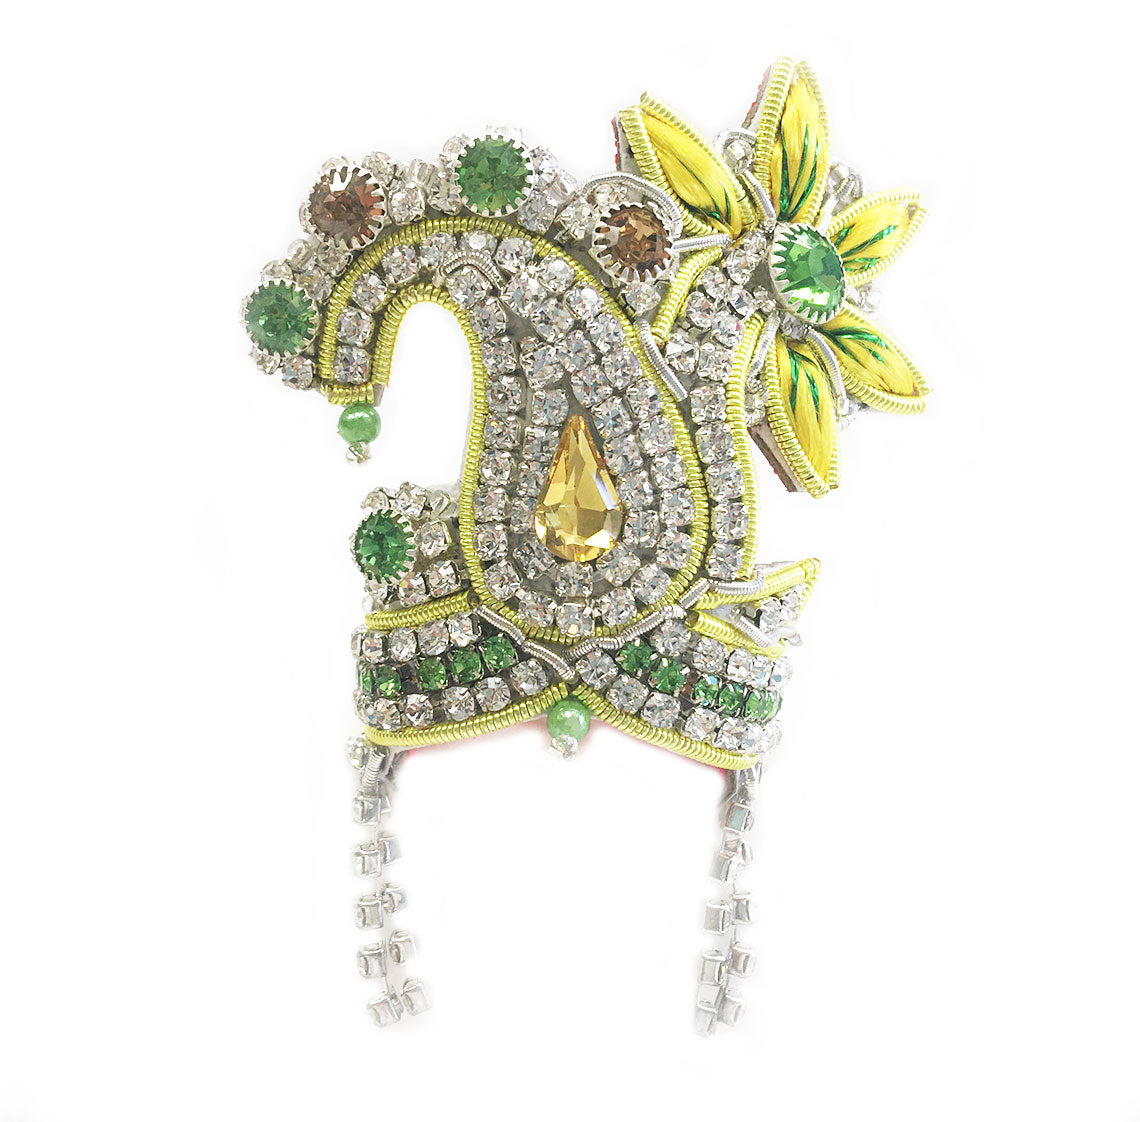 Sparkling Paisley Palm - Deity Crown Necklace Set - Yellow and Green